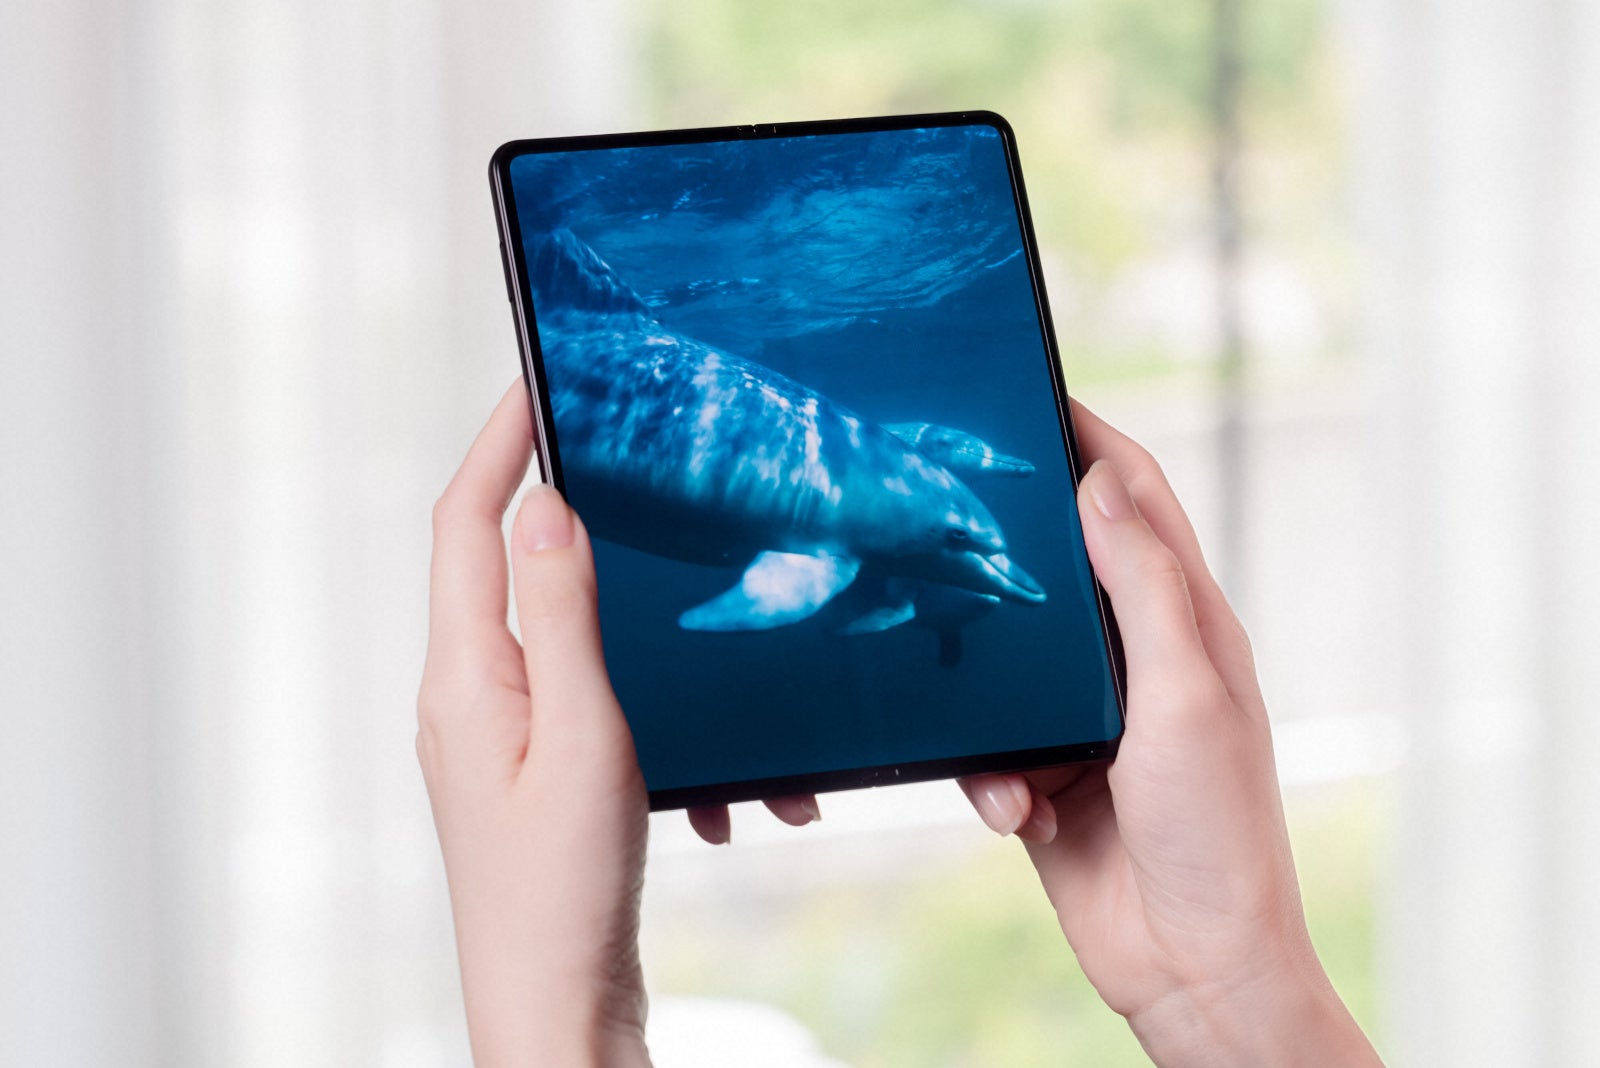 No holes, no notches - Samsung Galaxy Z Fold 3 5G is official: new specs, water resistance, S Pen